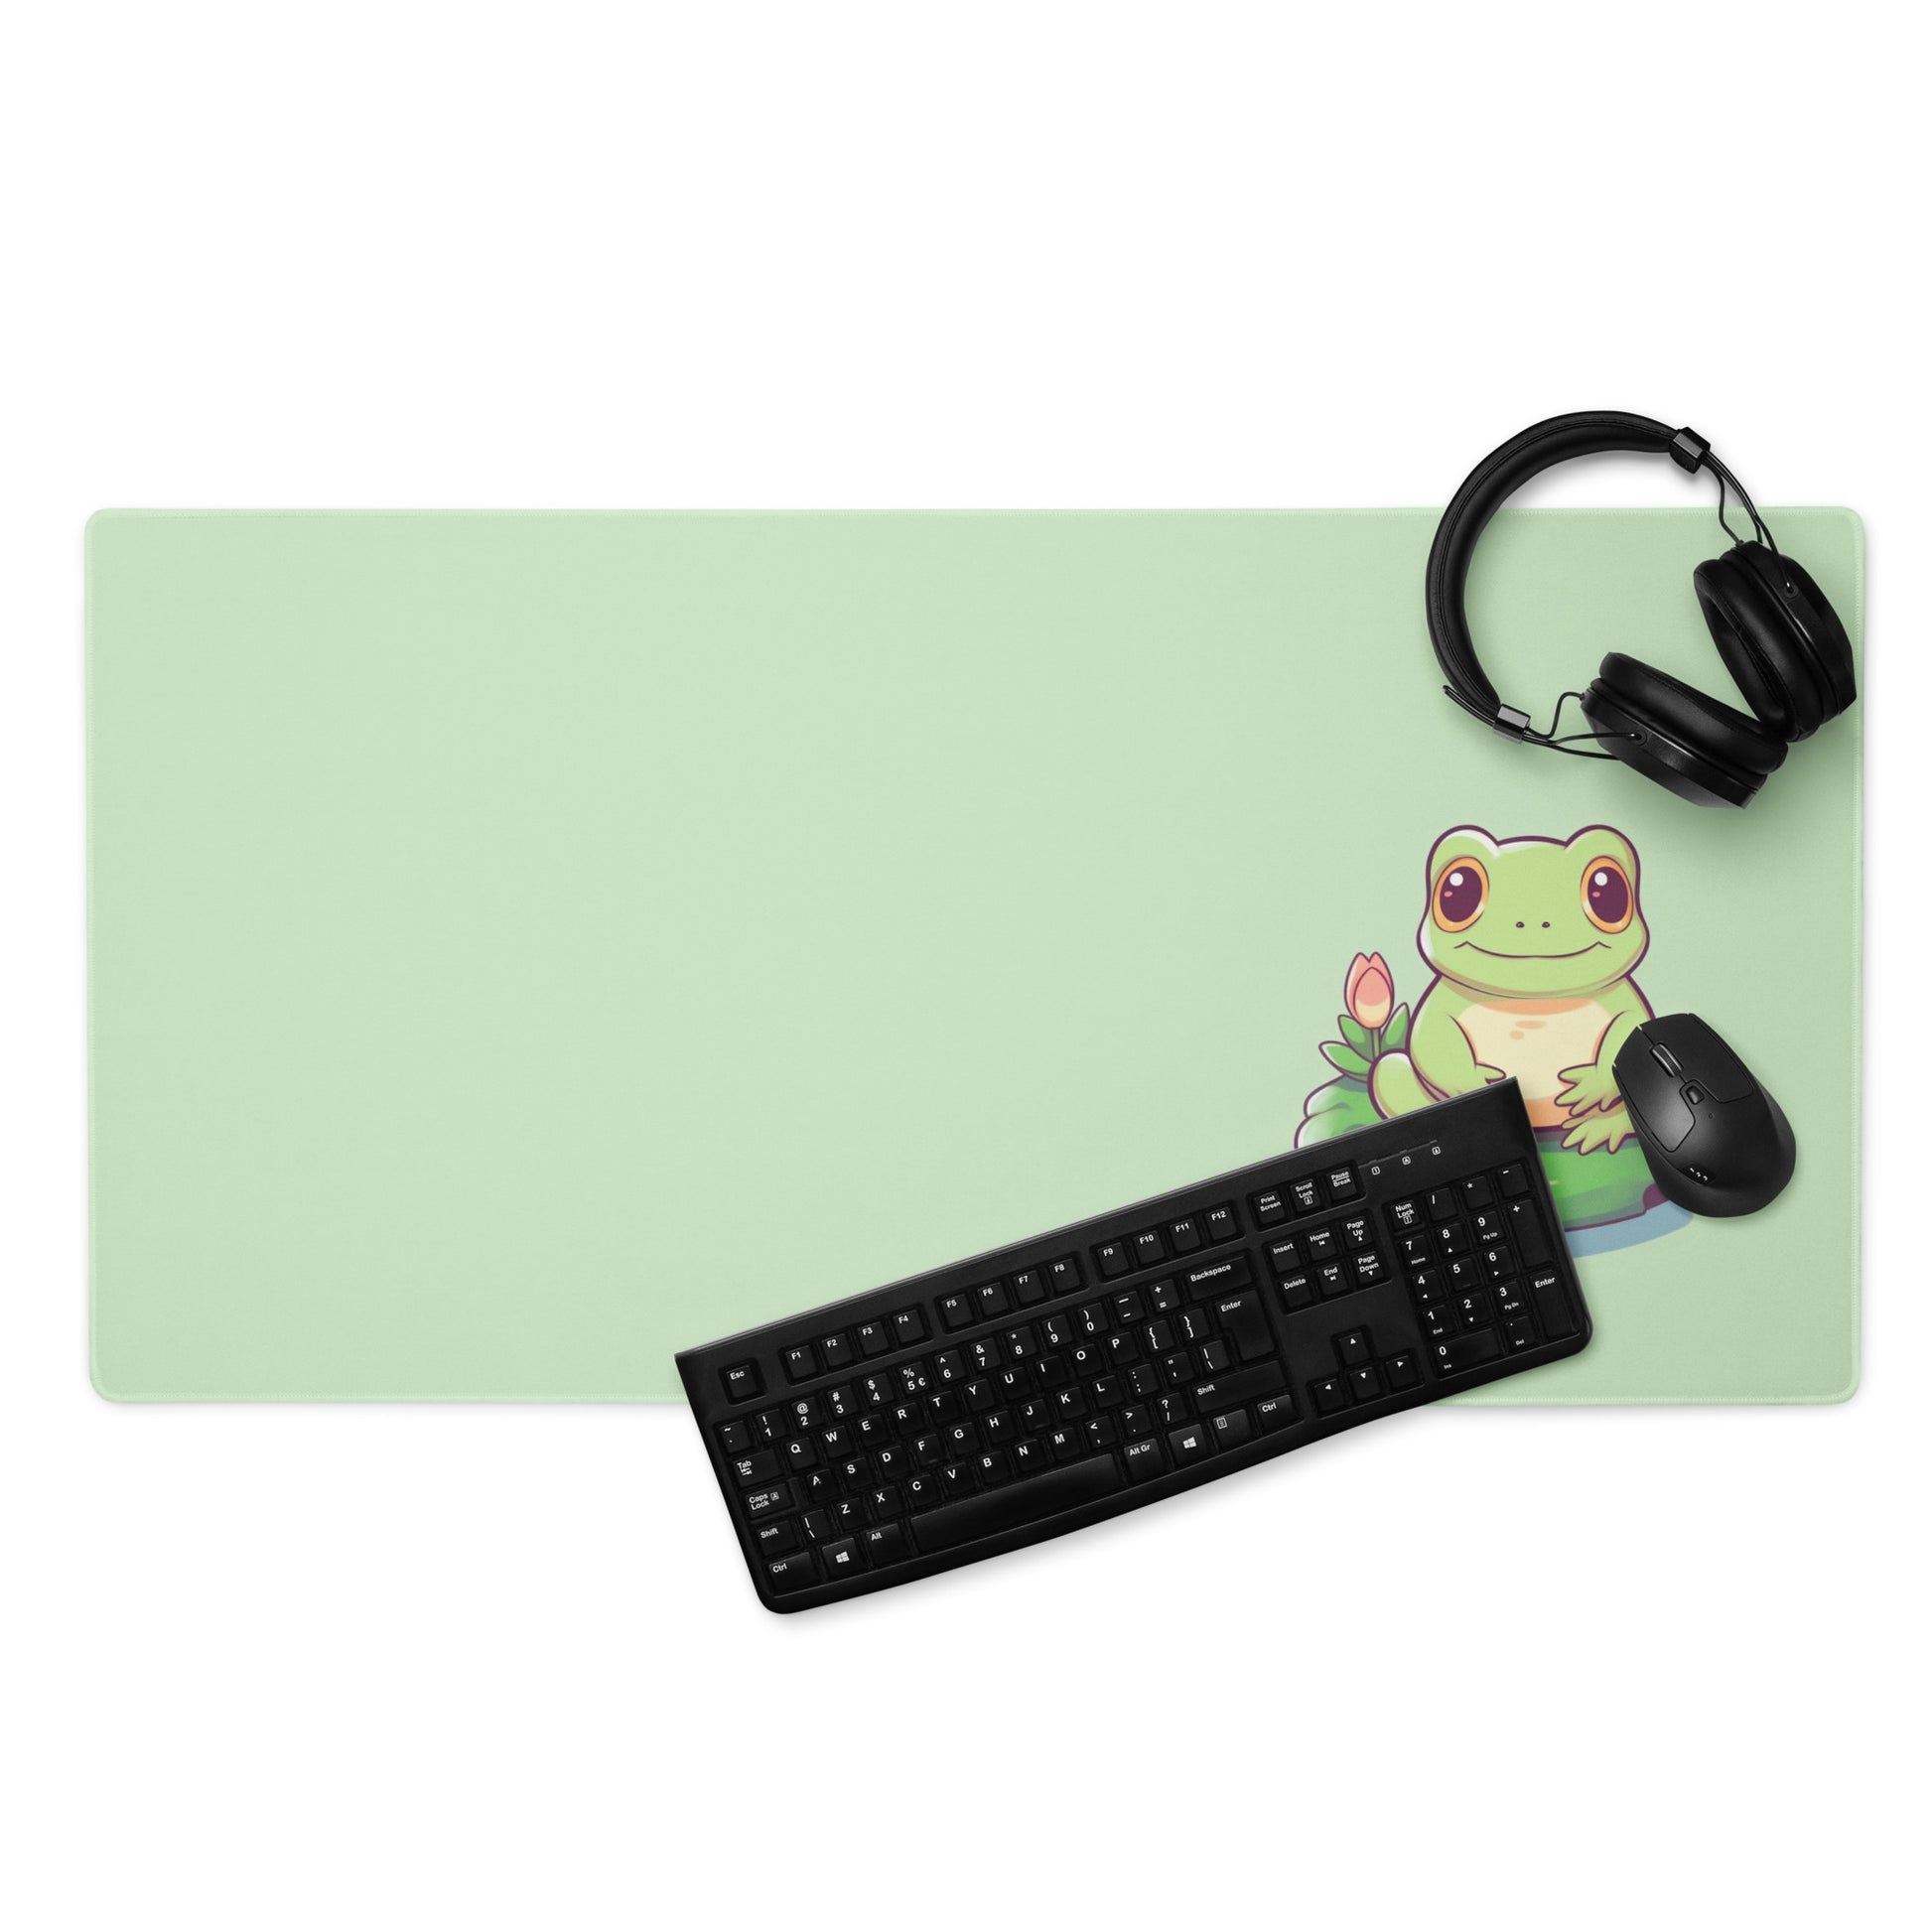 A 36" x 18" desk pad with a cute frog on it displayed with a keyboard, headphones and a mouse. Green in color.